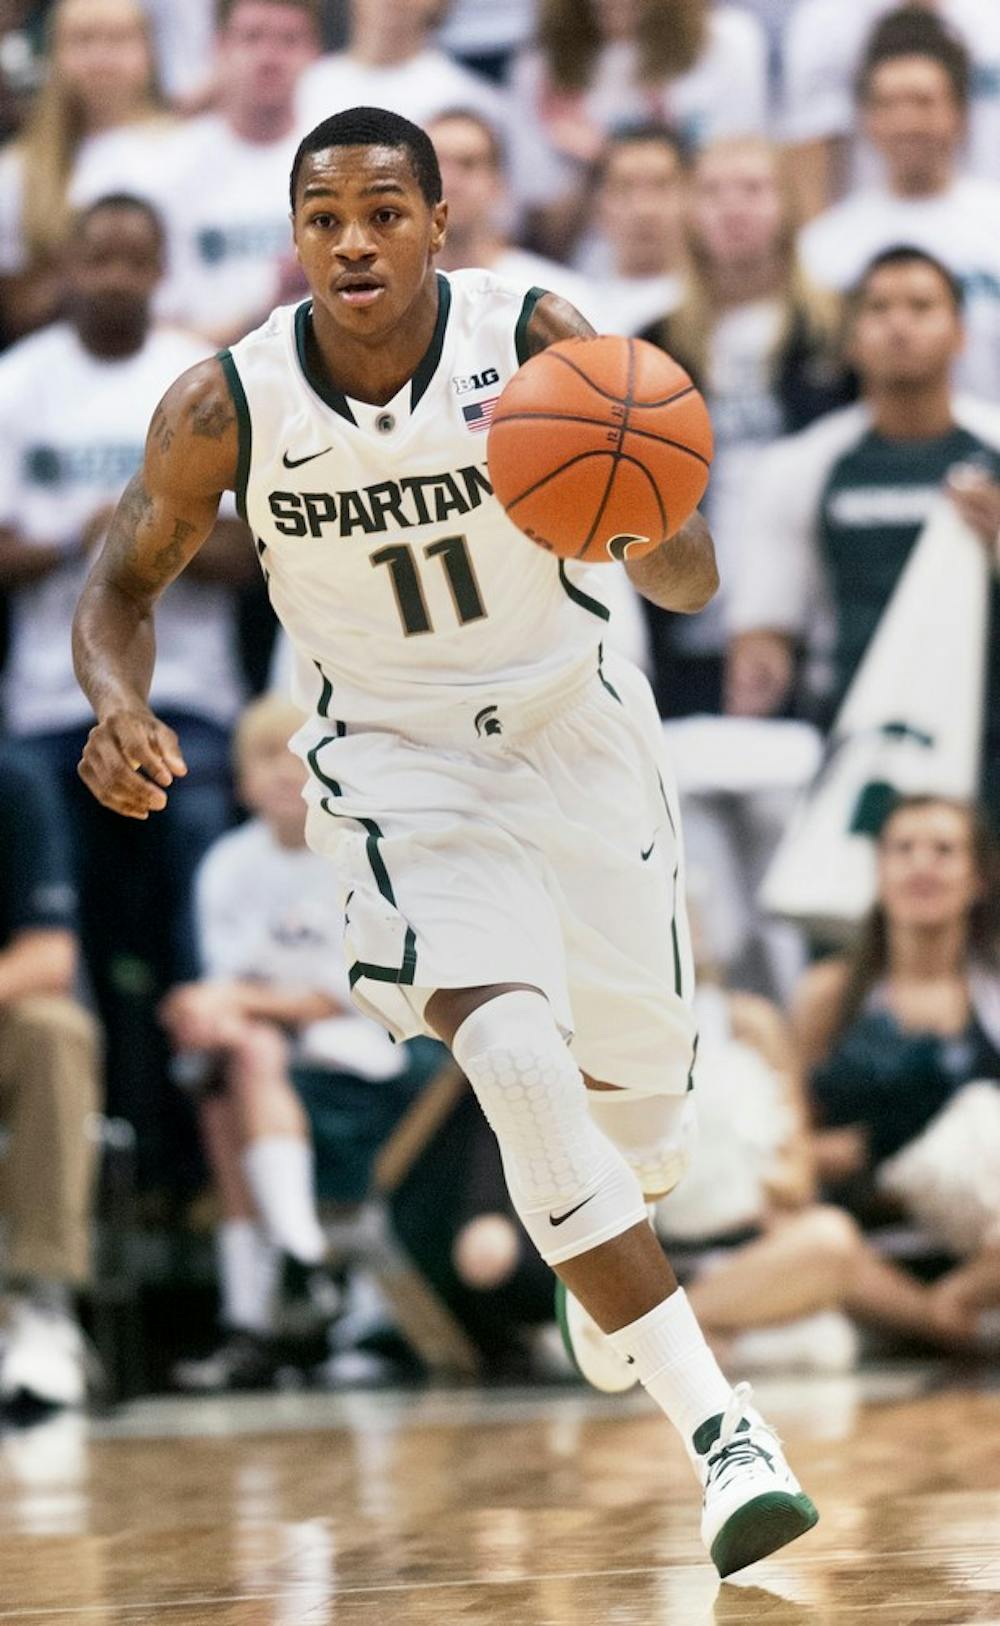 Junior guard Keith Appling dribbles the ball down the court Nov. 2, 2012, at Breslin Center. Appling recorded 13 points during a 62-49 victory over St. Cloud State after the second and final exhibition game of the season. Adam Toolin/The State News